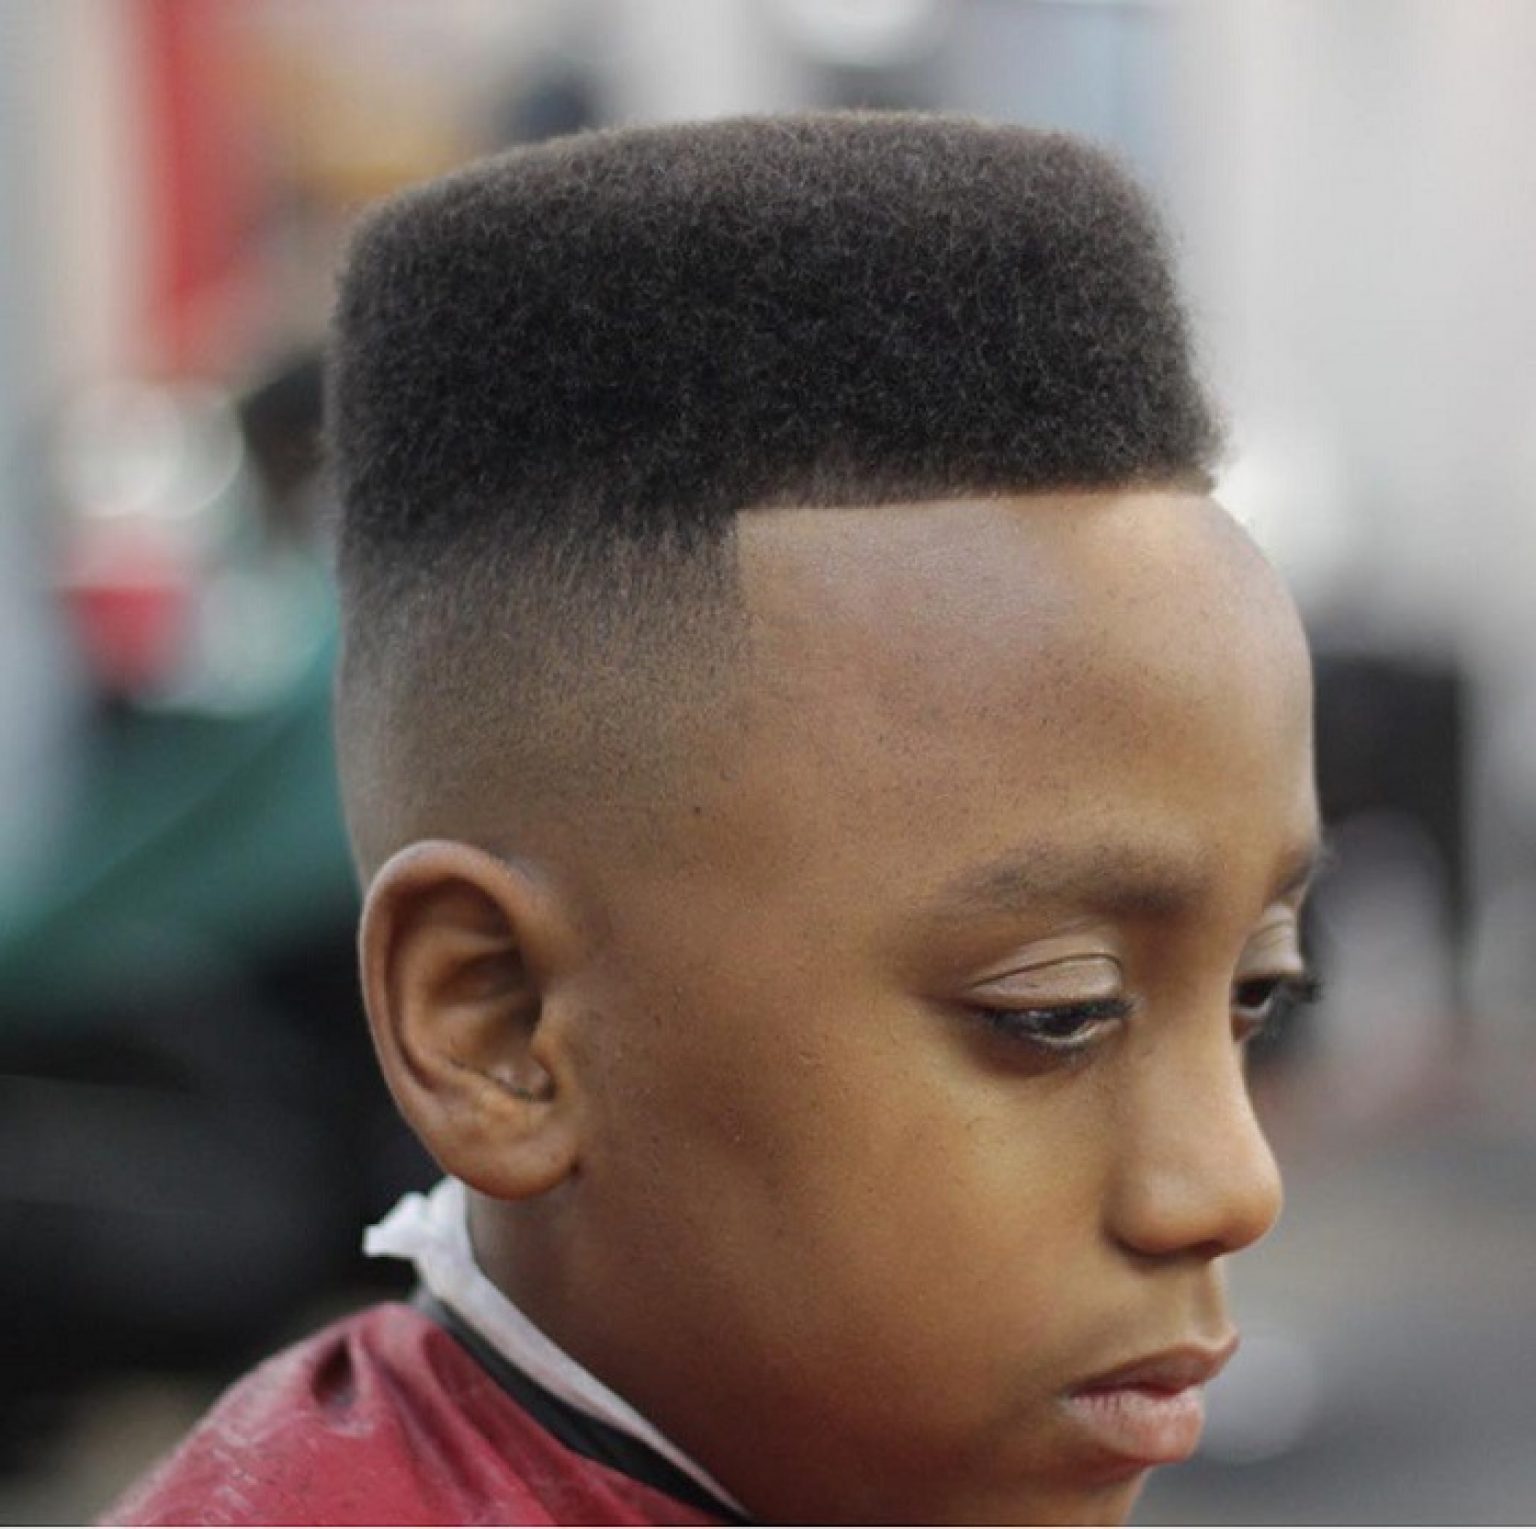 55 Exquisite Flat Top Haircut Designs - New Style In 2021